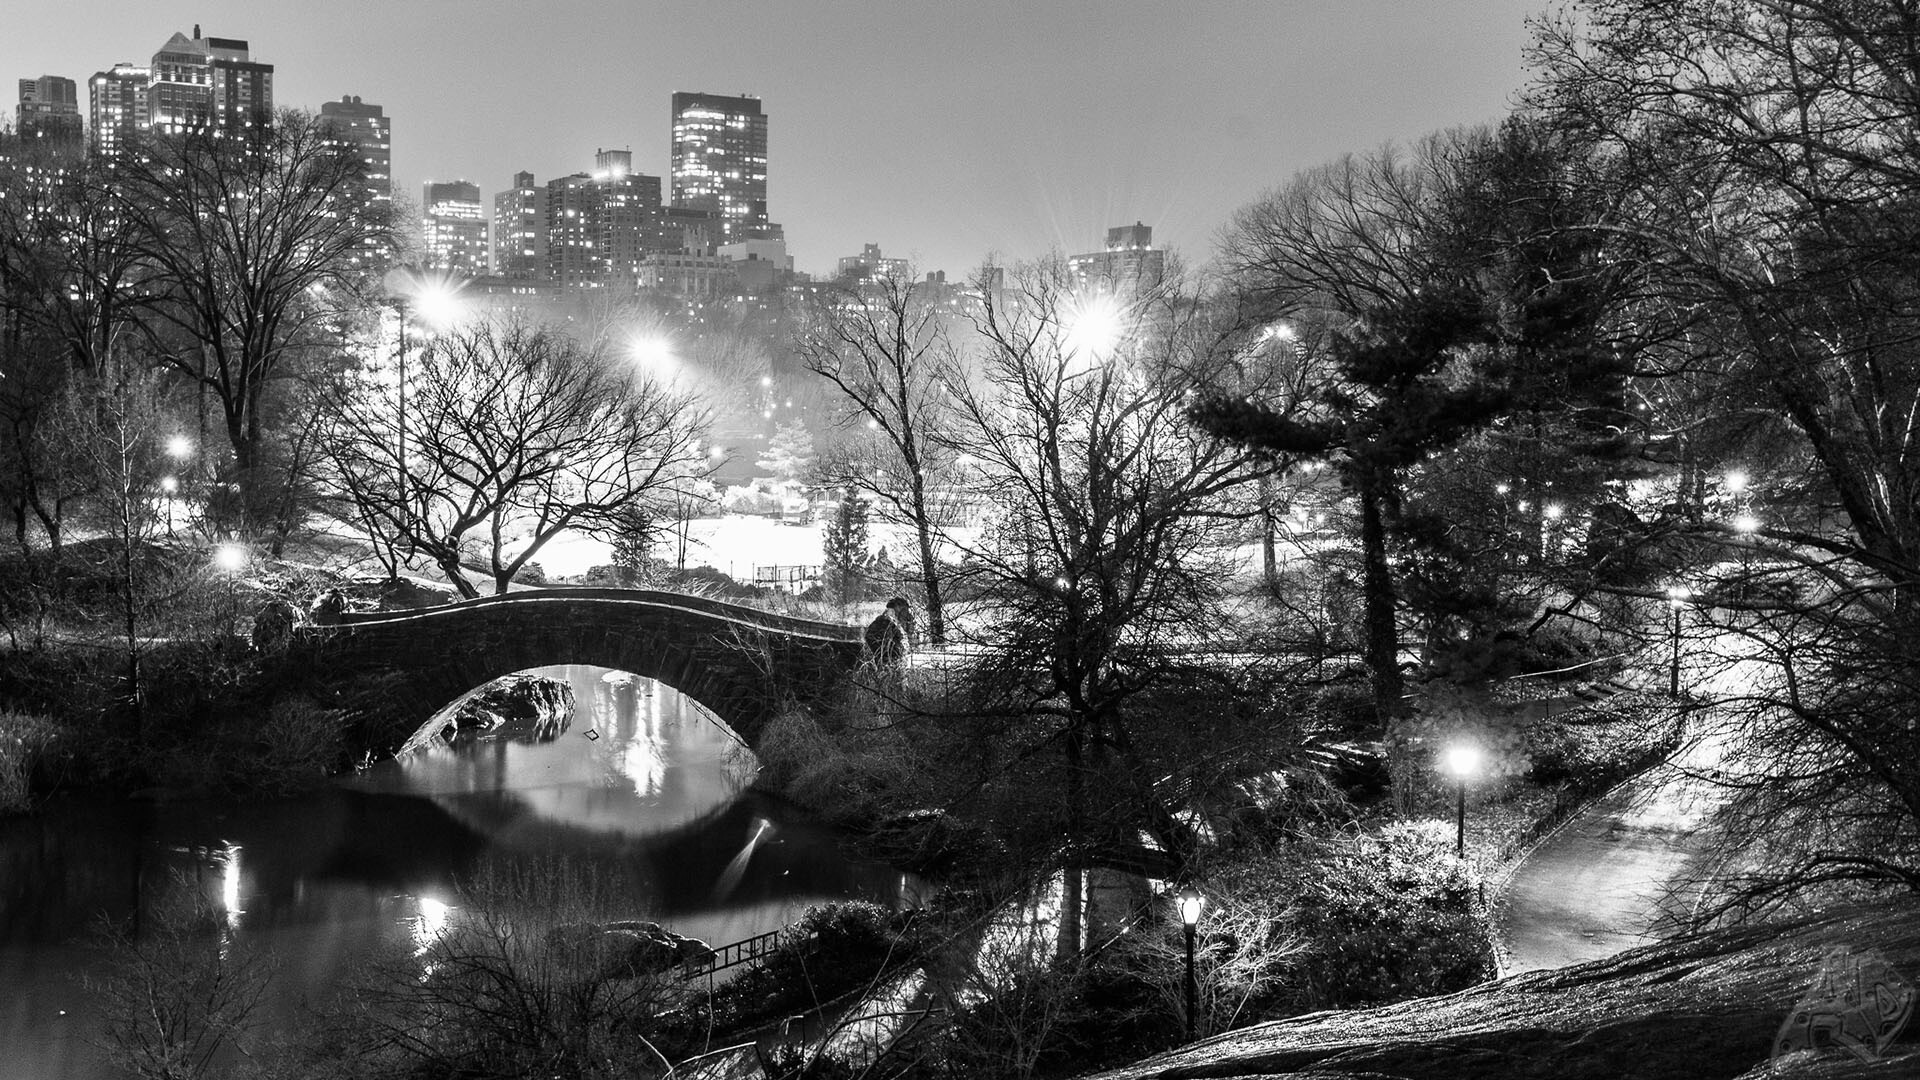 A black and white photograph overlooking The Gapstow Bridge and The Pond on a winter evening, taken from The Big Rock.

Central Park, NYC (2015)